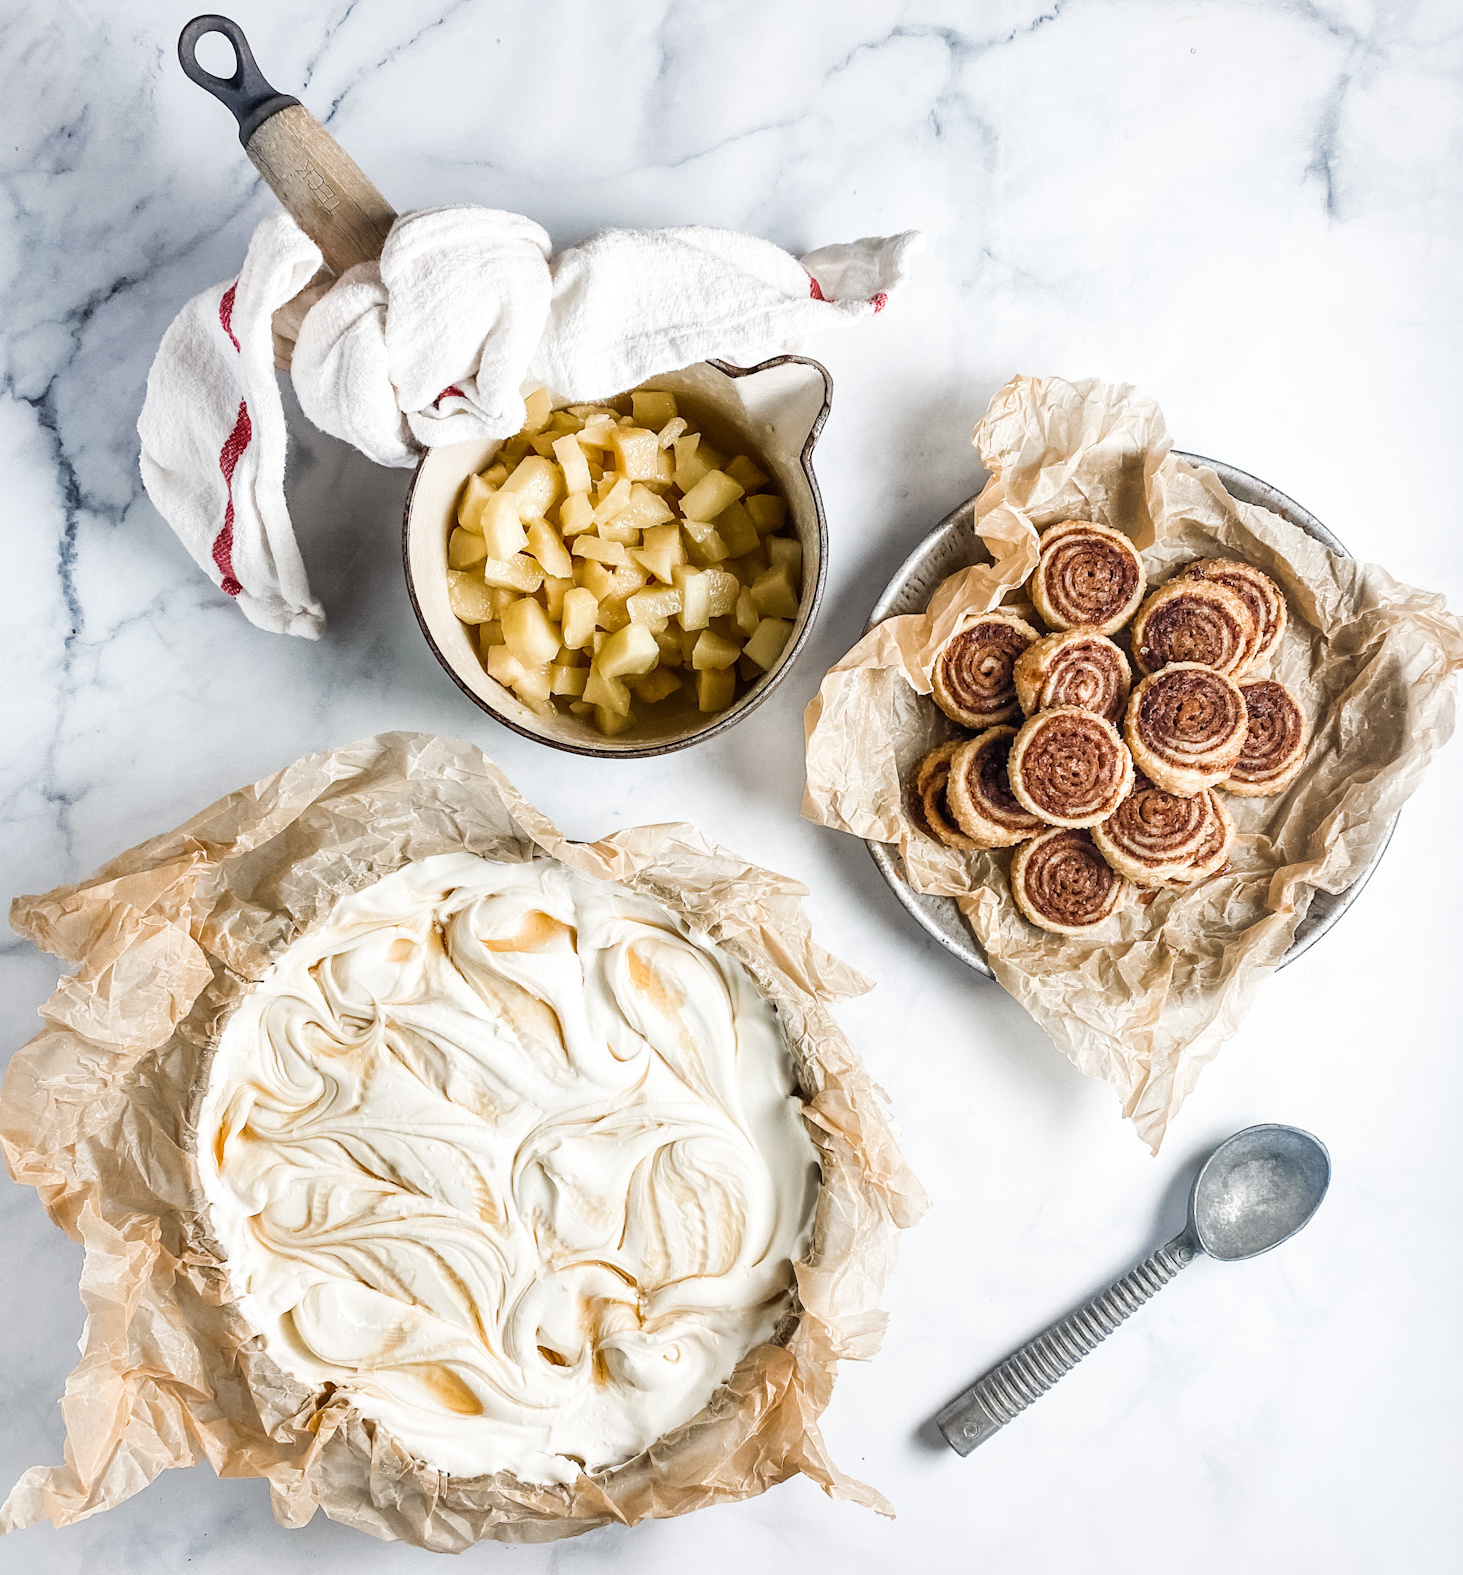 Salted Honey Ice Cream by Sheri Silver|@sherisilver